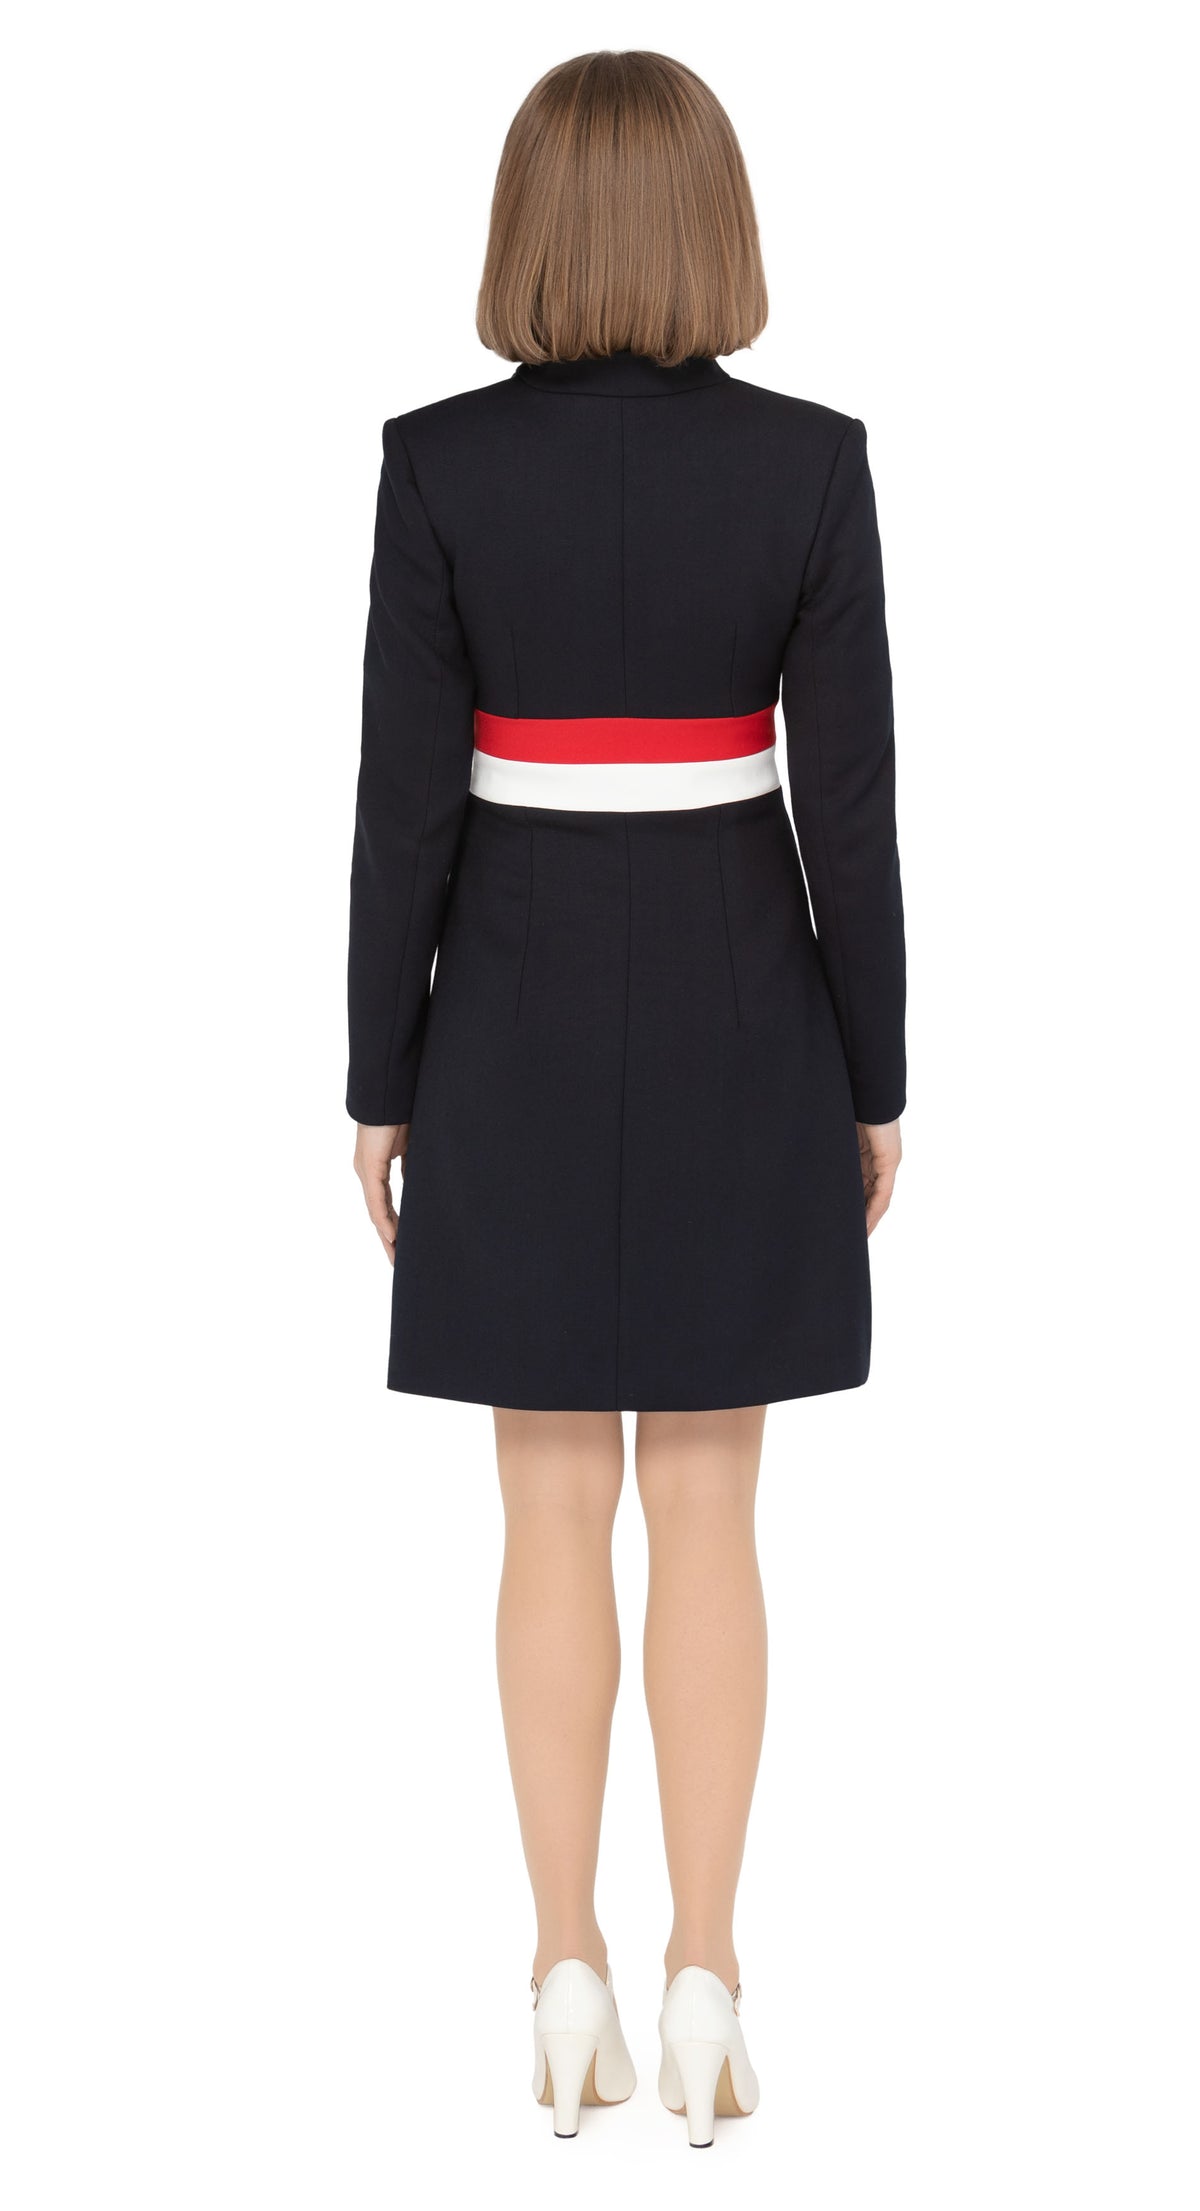 Fitted tricolor fair-weather coat with navy blue as the primary colours leading into light cream and red bands around the waistline. Fully lined with a gold coloured button closure and invisible essentials side pockets.  Pairs well with our Sixties Style Navy/Red/Light Cream Dress to complete a very wearable and versatile high fashion style for all occasions.